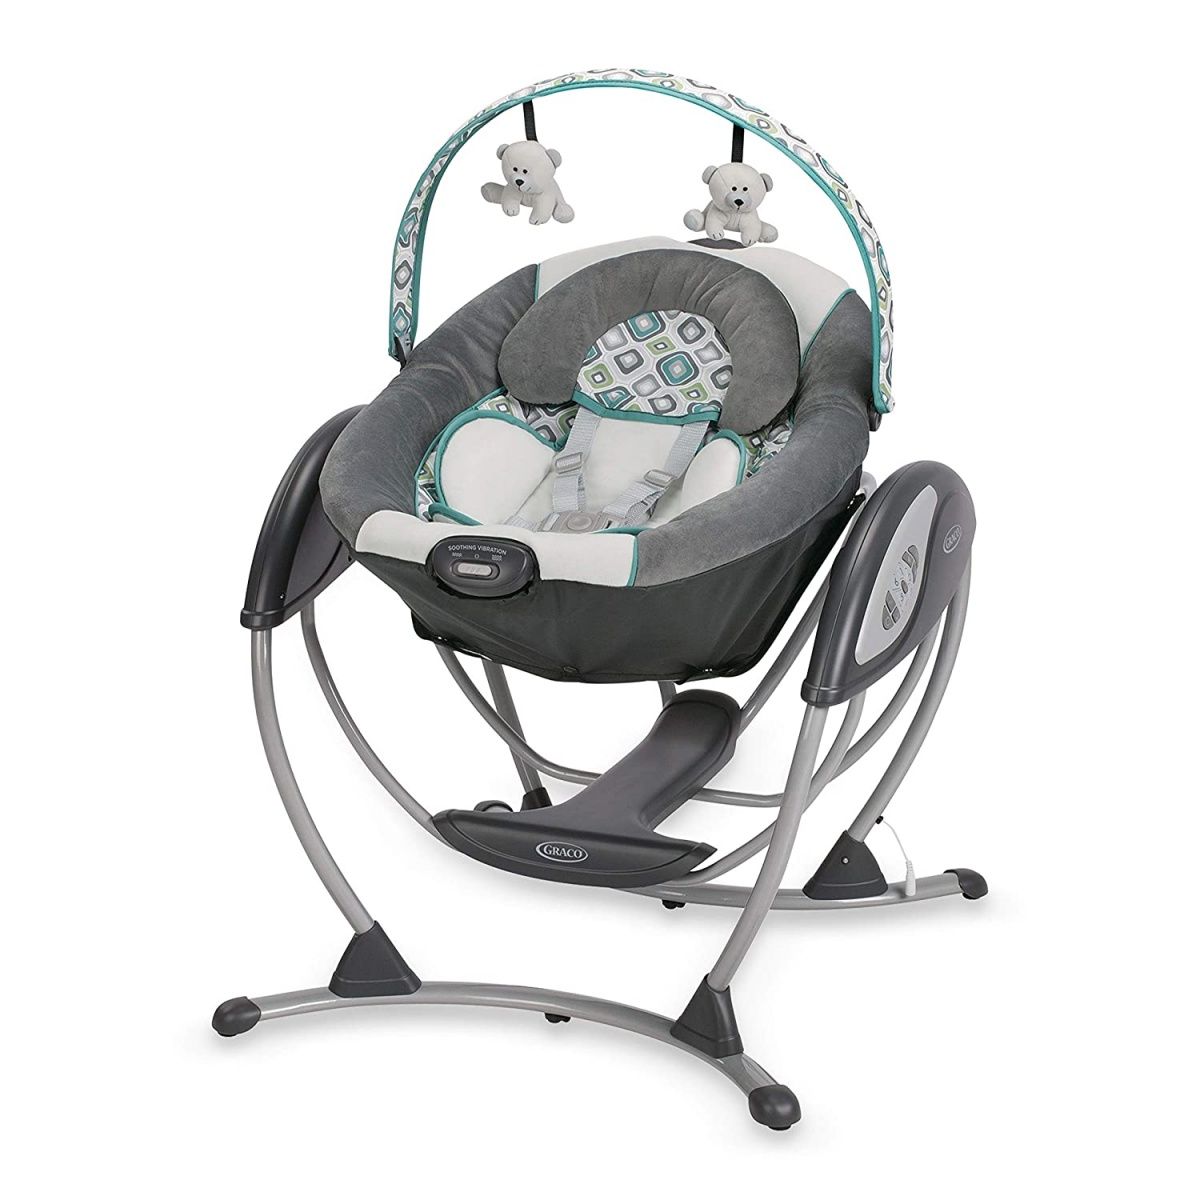 Graco Glider LX Swing Review